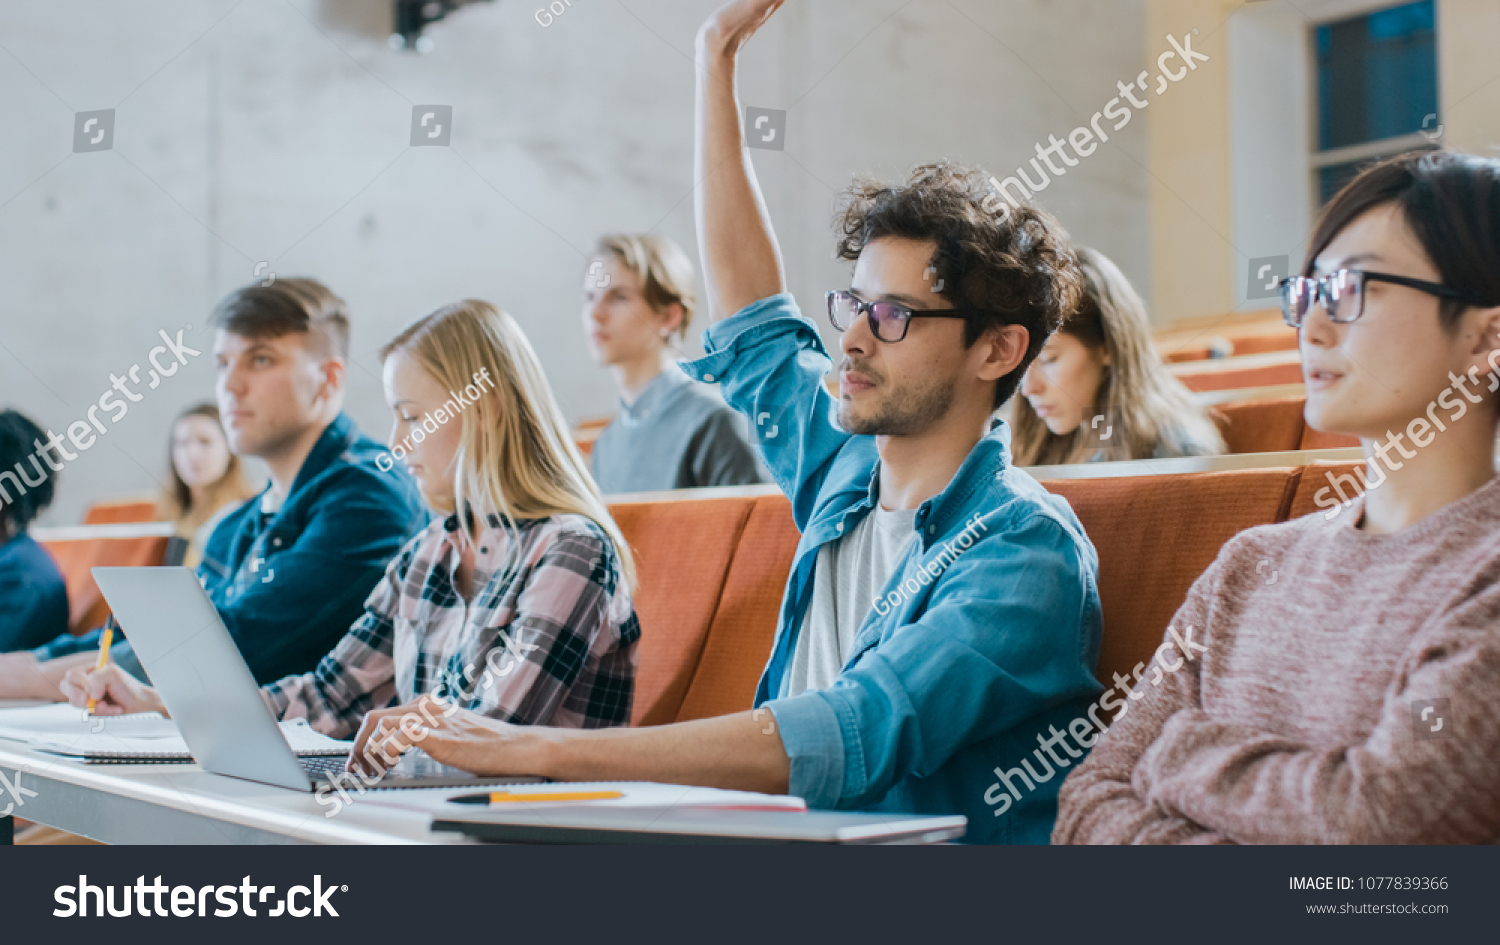 Handsome Hispanic Student Uses Laptop while Listening to a Lecture at the University, He Raises Hand and Asks Lecturer a Question. Multi Ethnic Group of Modern Bright Students. #1077839366